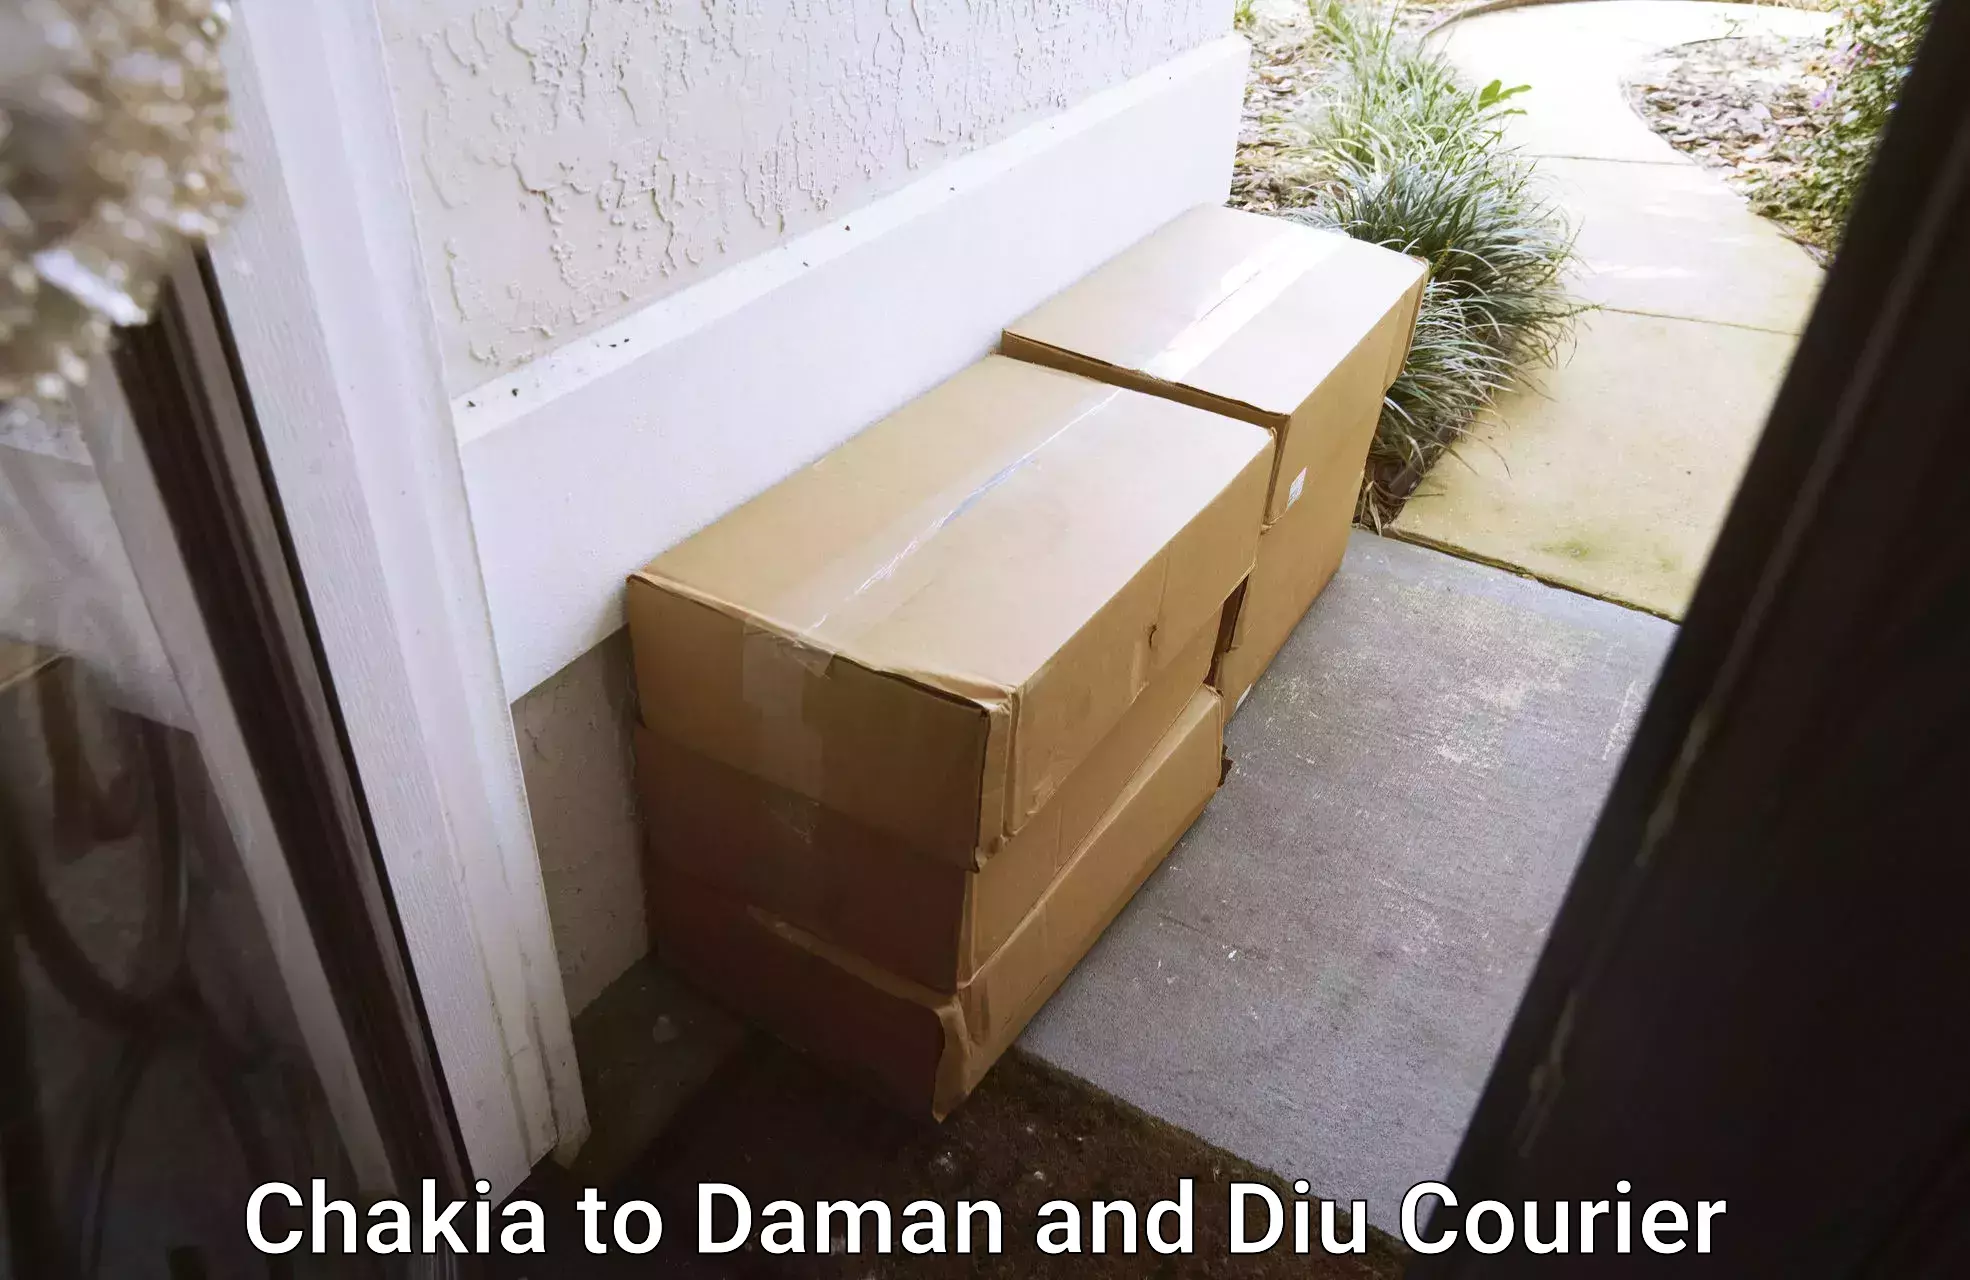 Furniture transport specialists Chakia to Daman and Diu